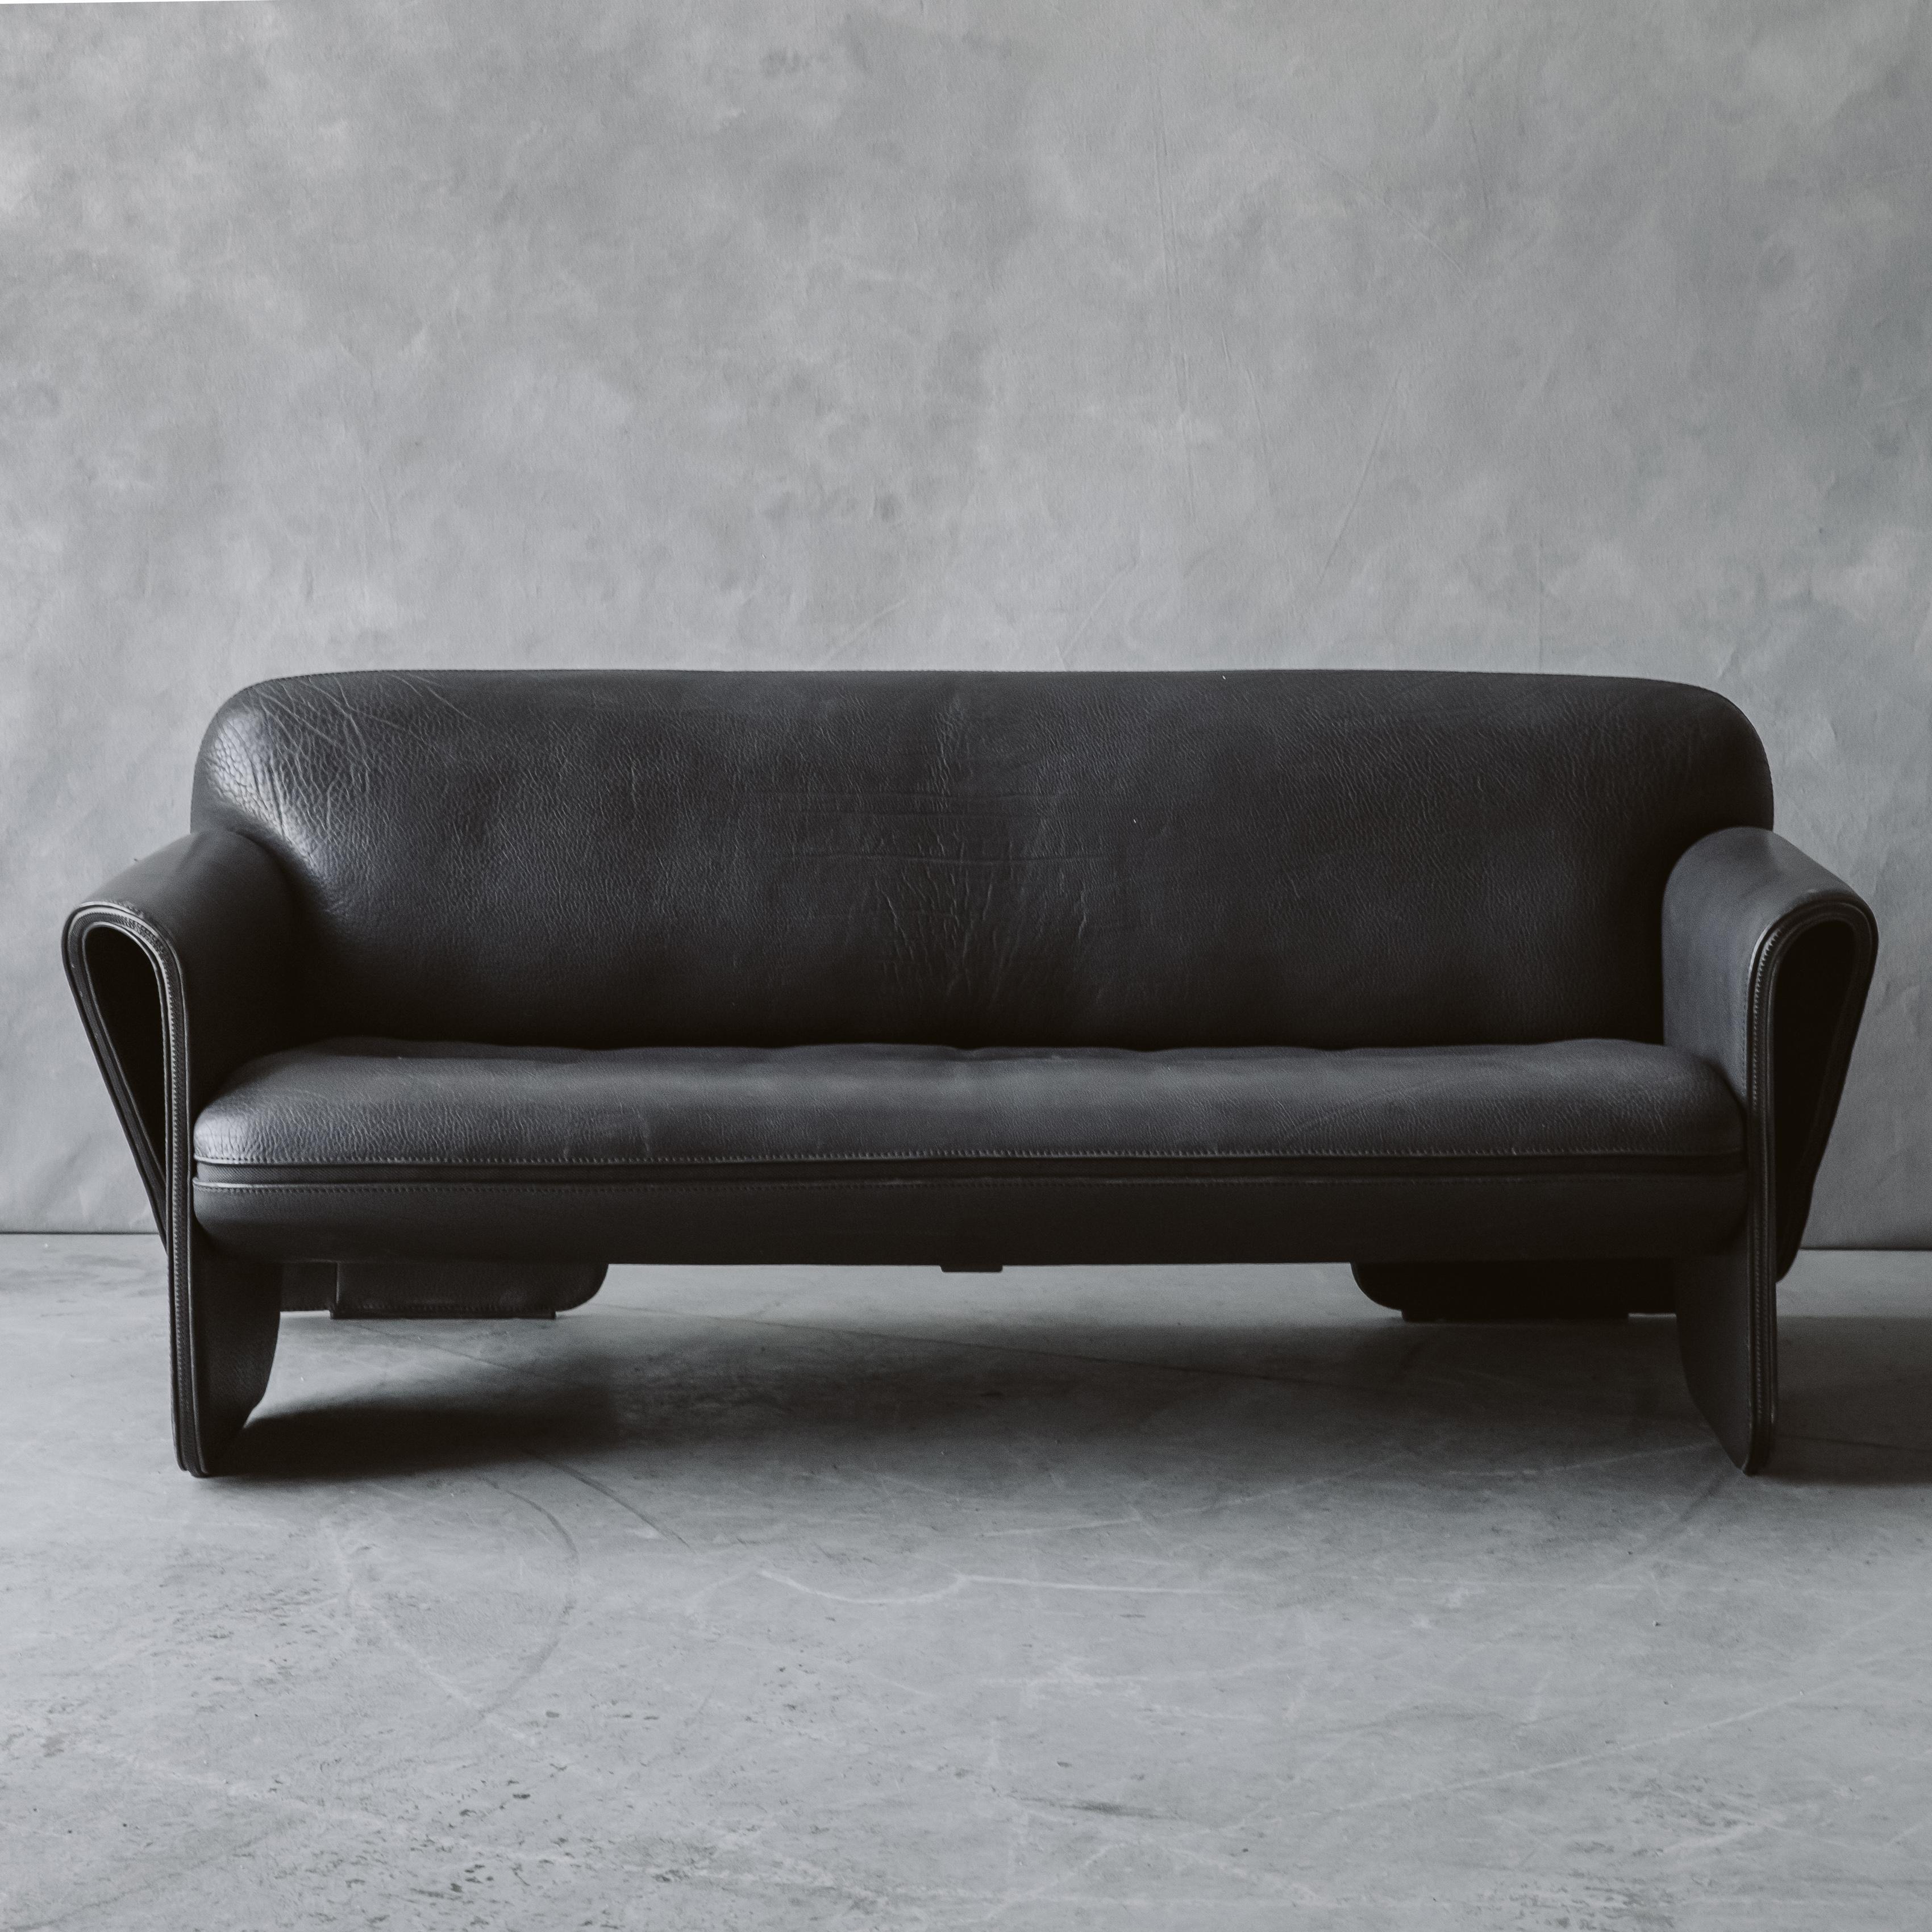 Vintage De Sede Sofa Model DS 125, Switzerland 1970s. Original black leather upholstery with great wear and use.

We prefer to speak directly with our clients. So, If you have any questions or would like to know more please give us a call or drop